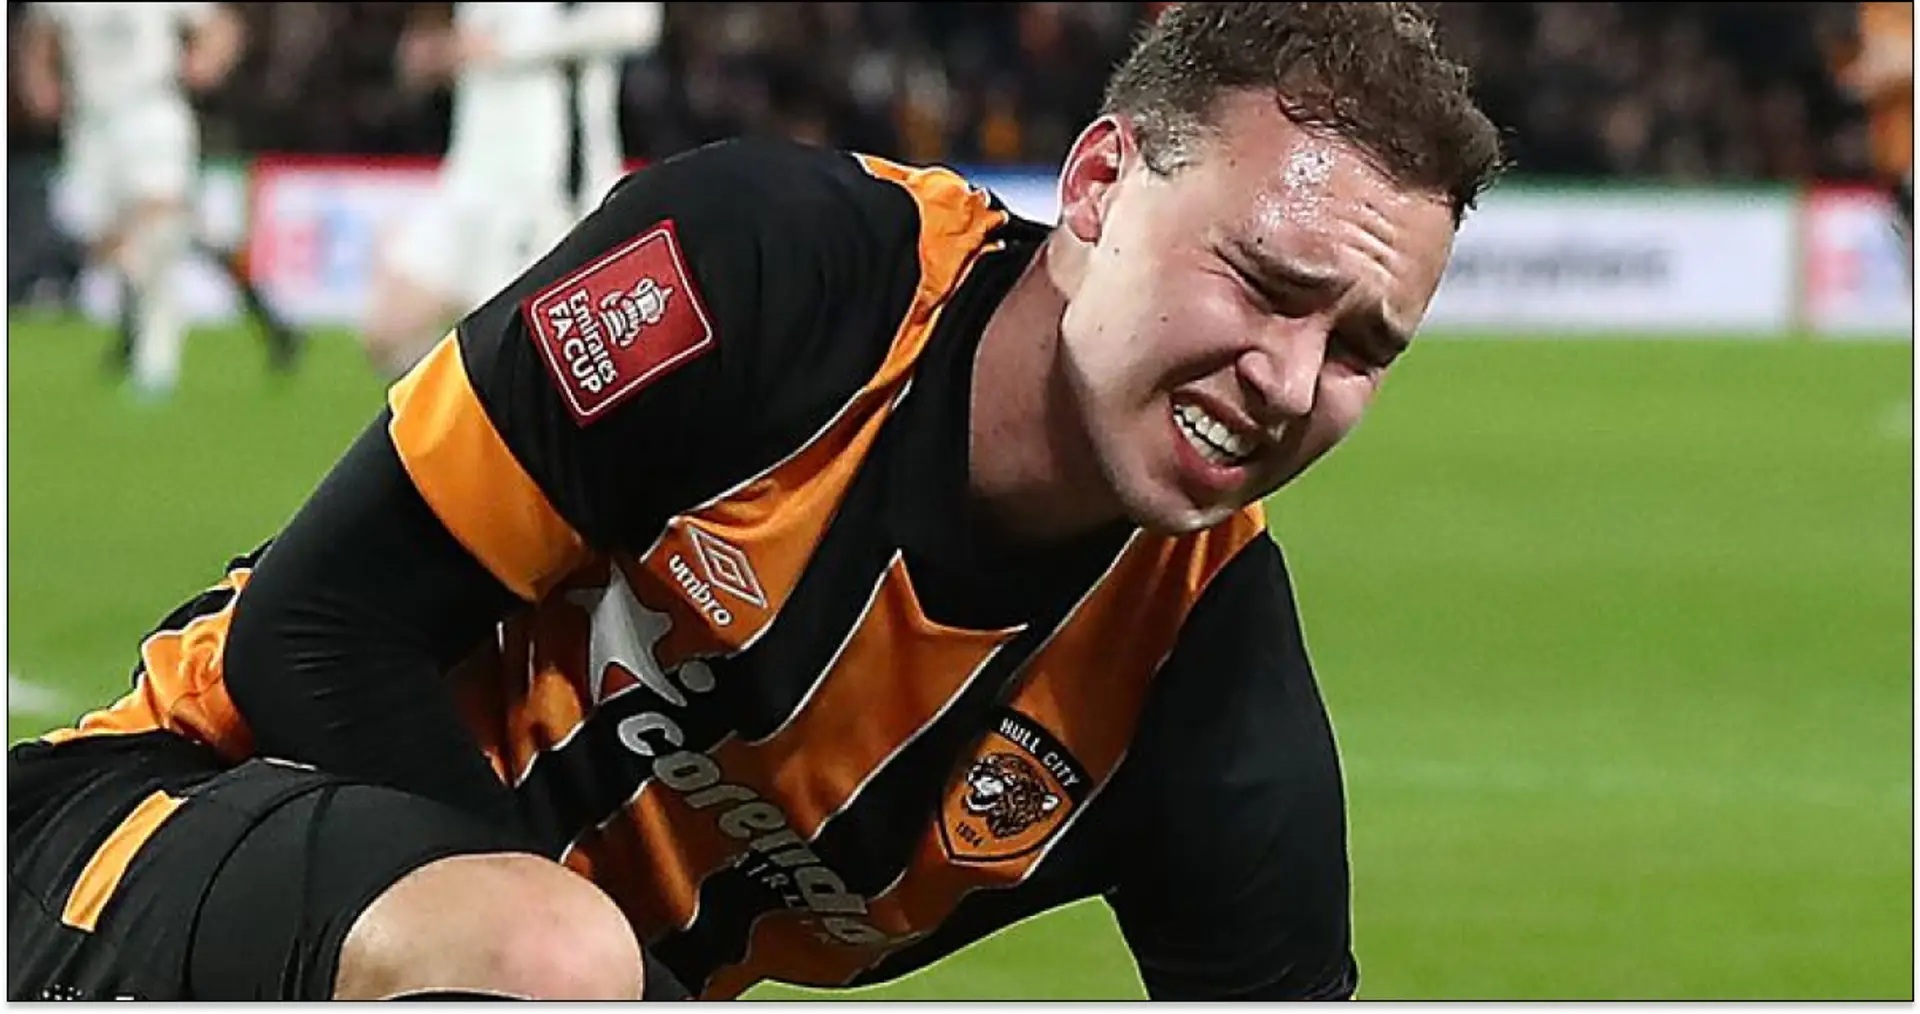 Chelsea to recall Harvey Vale from Hull, he can't go on another loan (reliability: 5 stars)